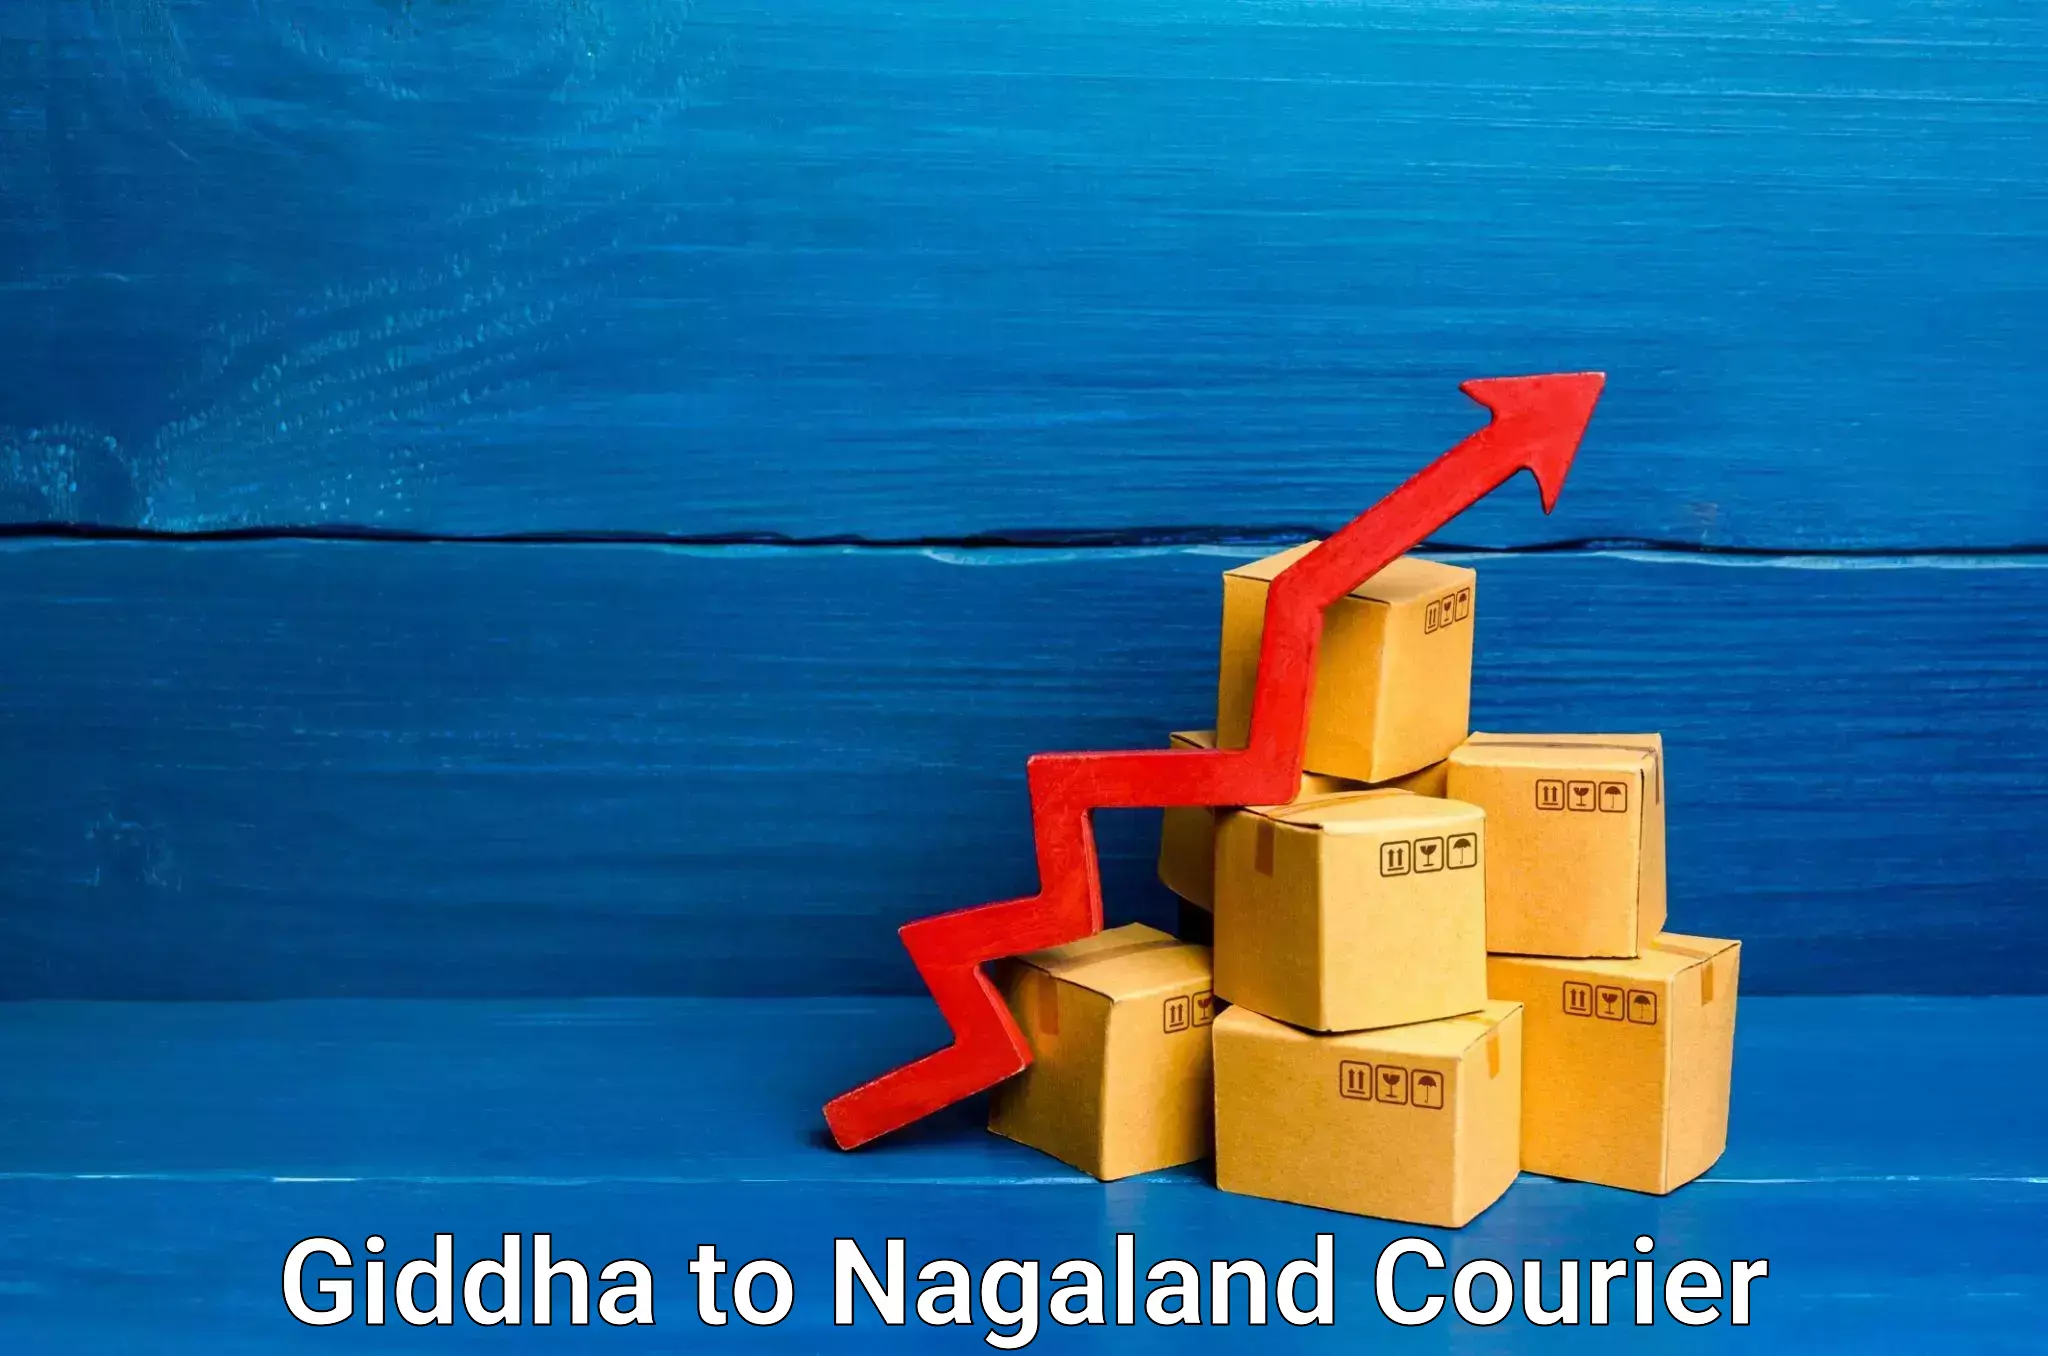 Furniture moving assistance in Giddha to Nagaland